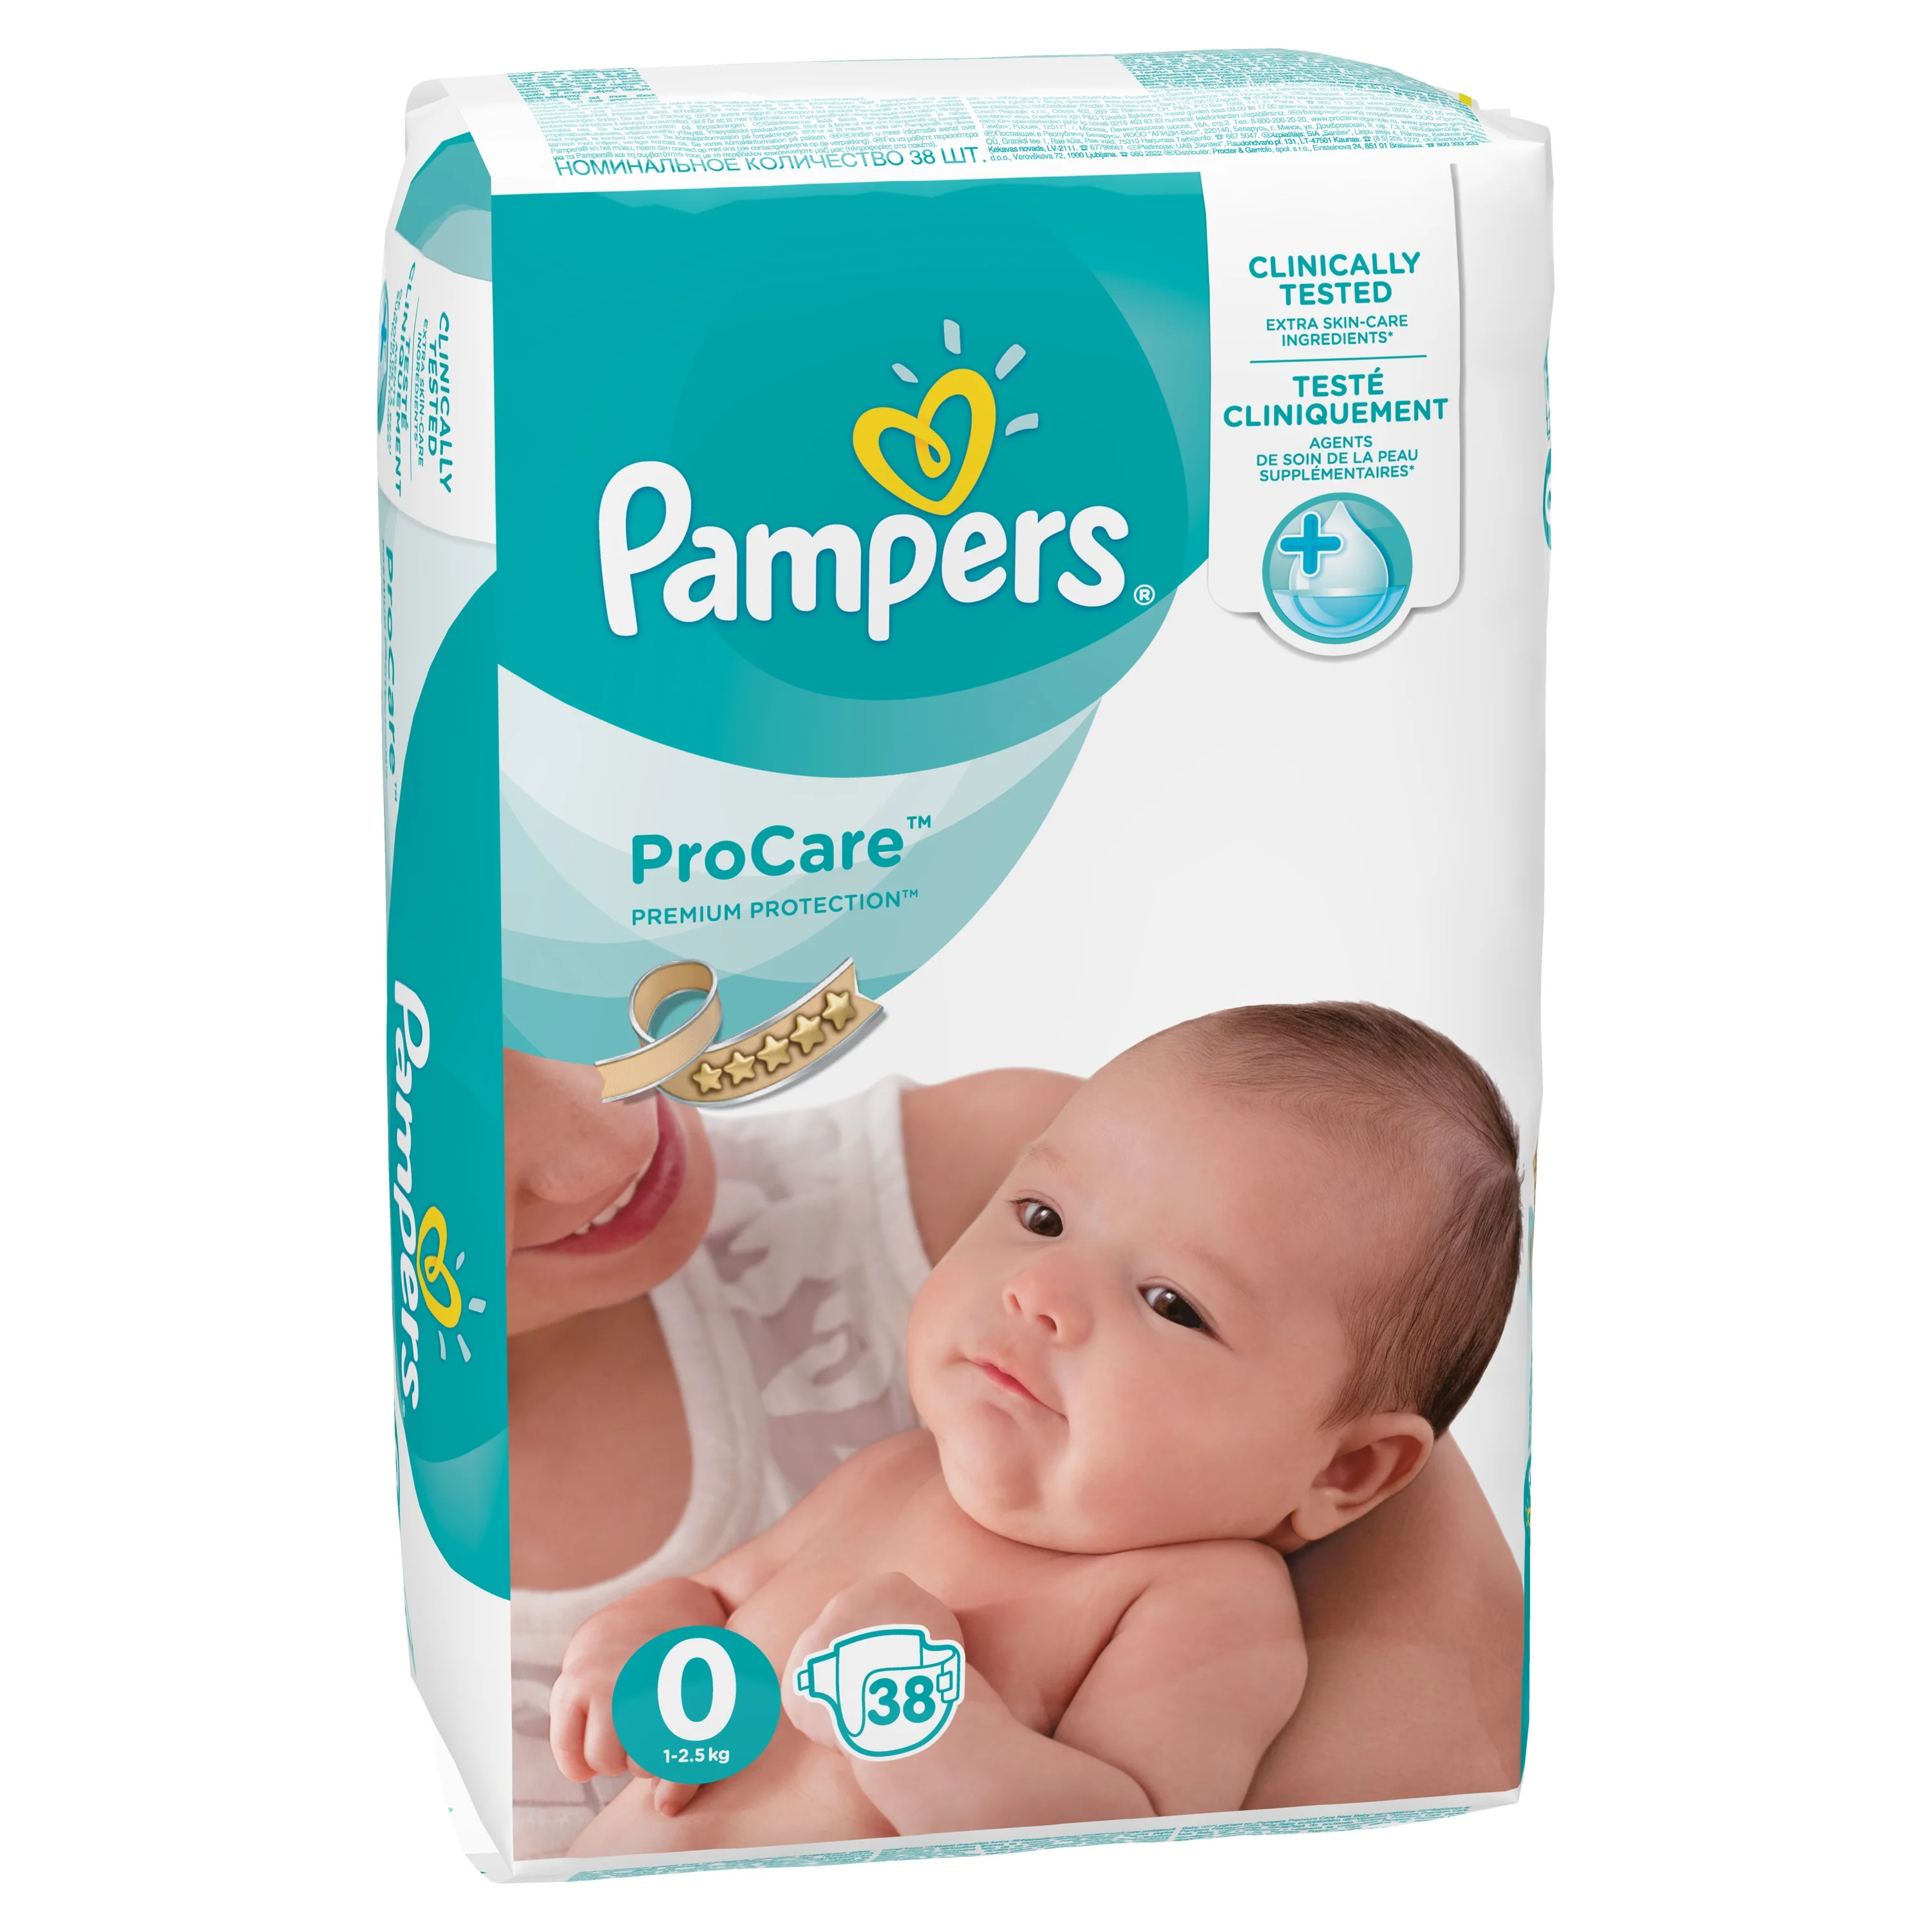 Pampers Procare Premium Protection Размер 0, 38 шт., 1–2,5 кг